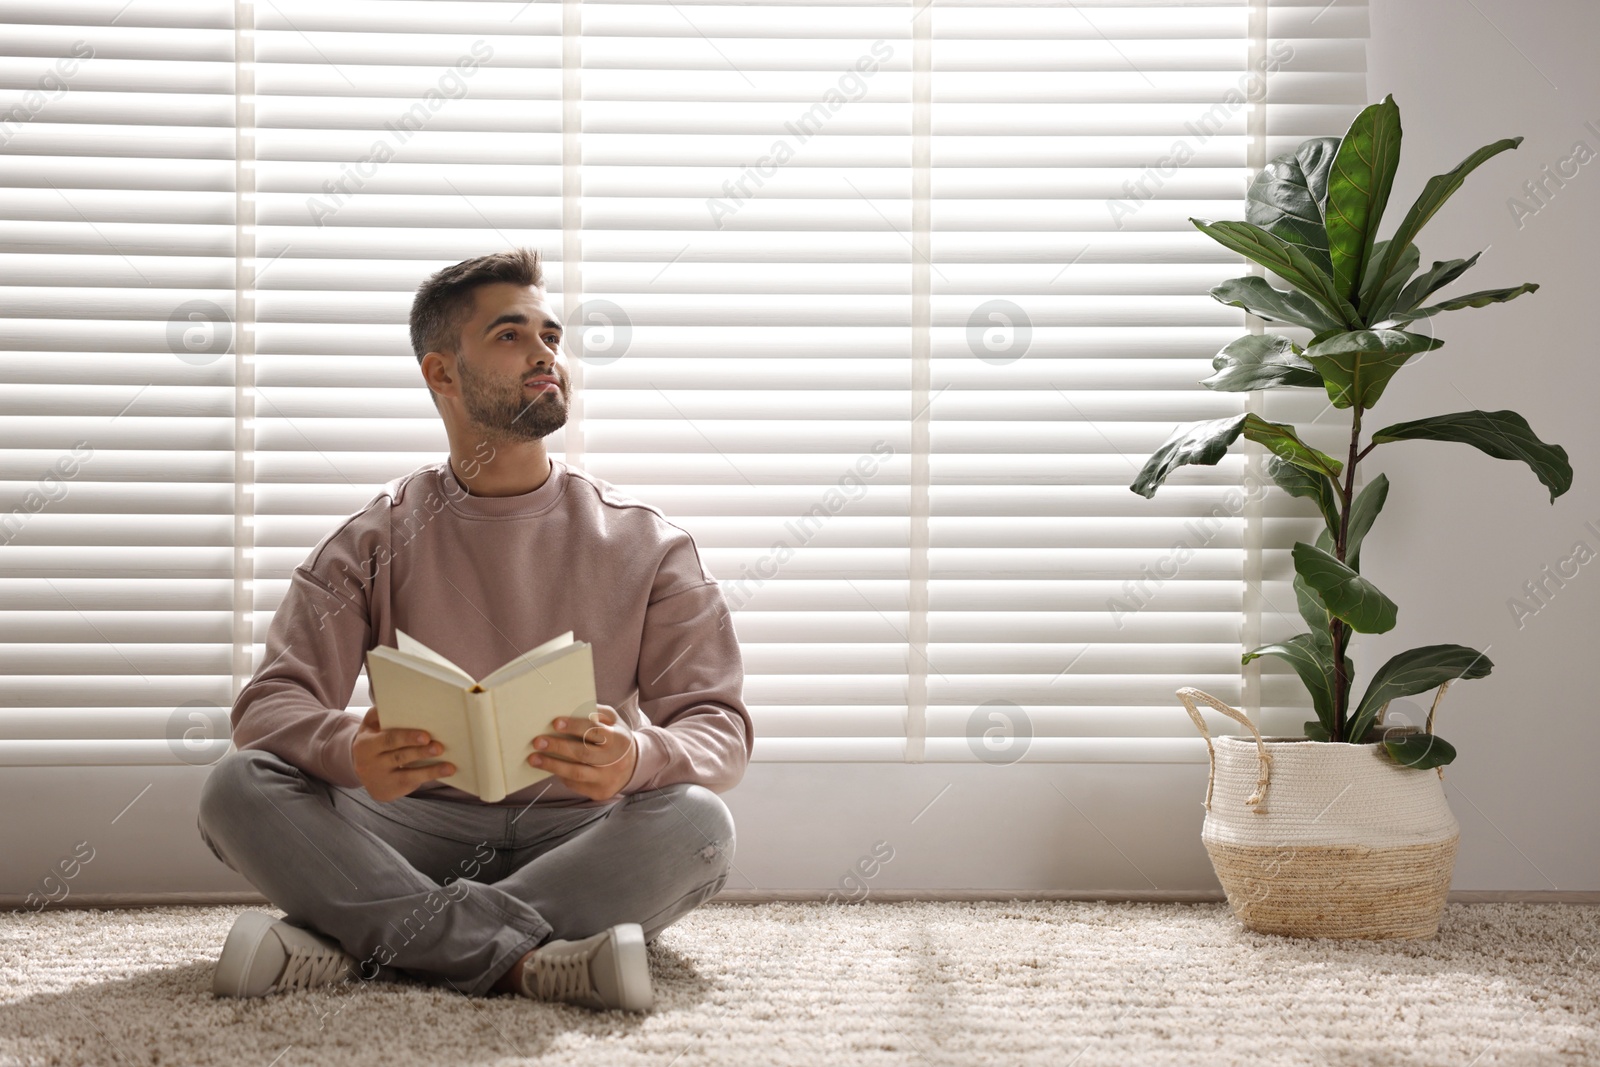 Photo of Man reading book near window blinds at home